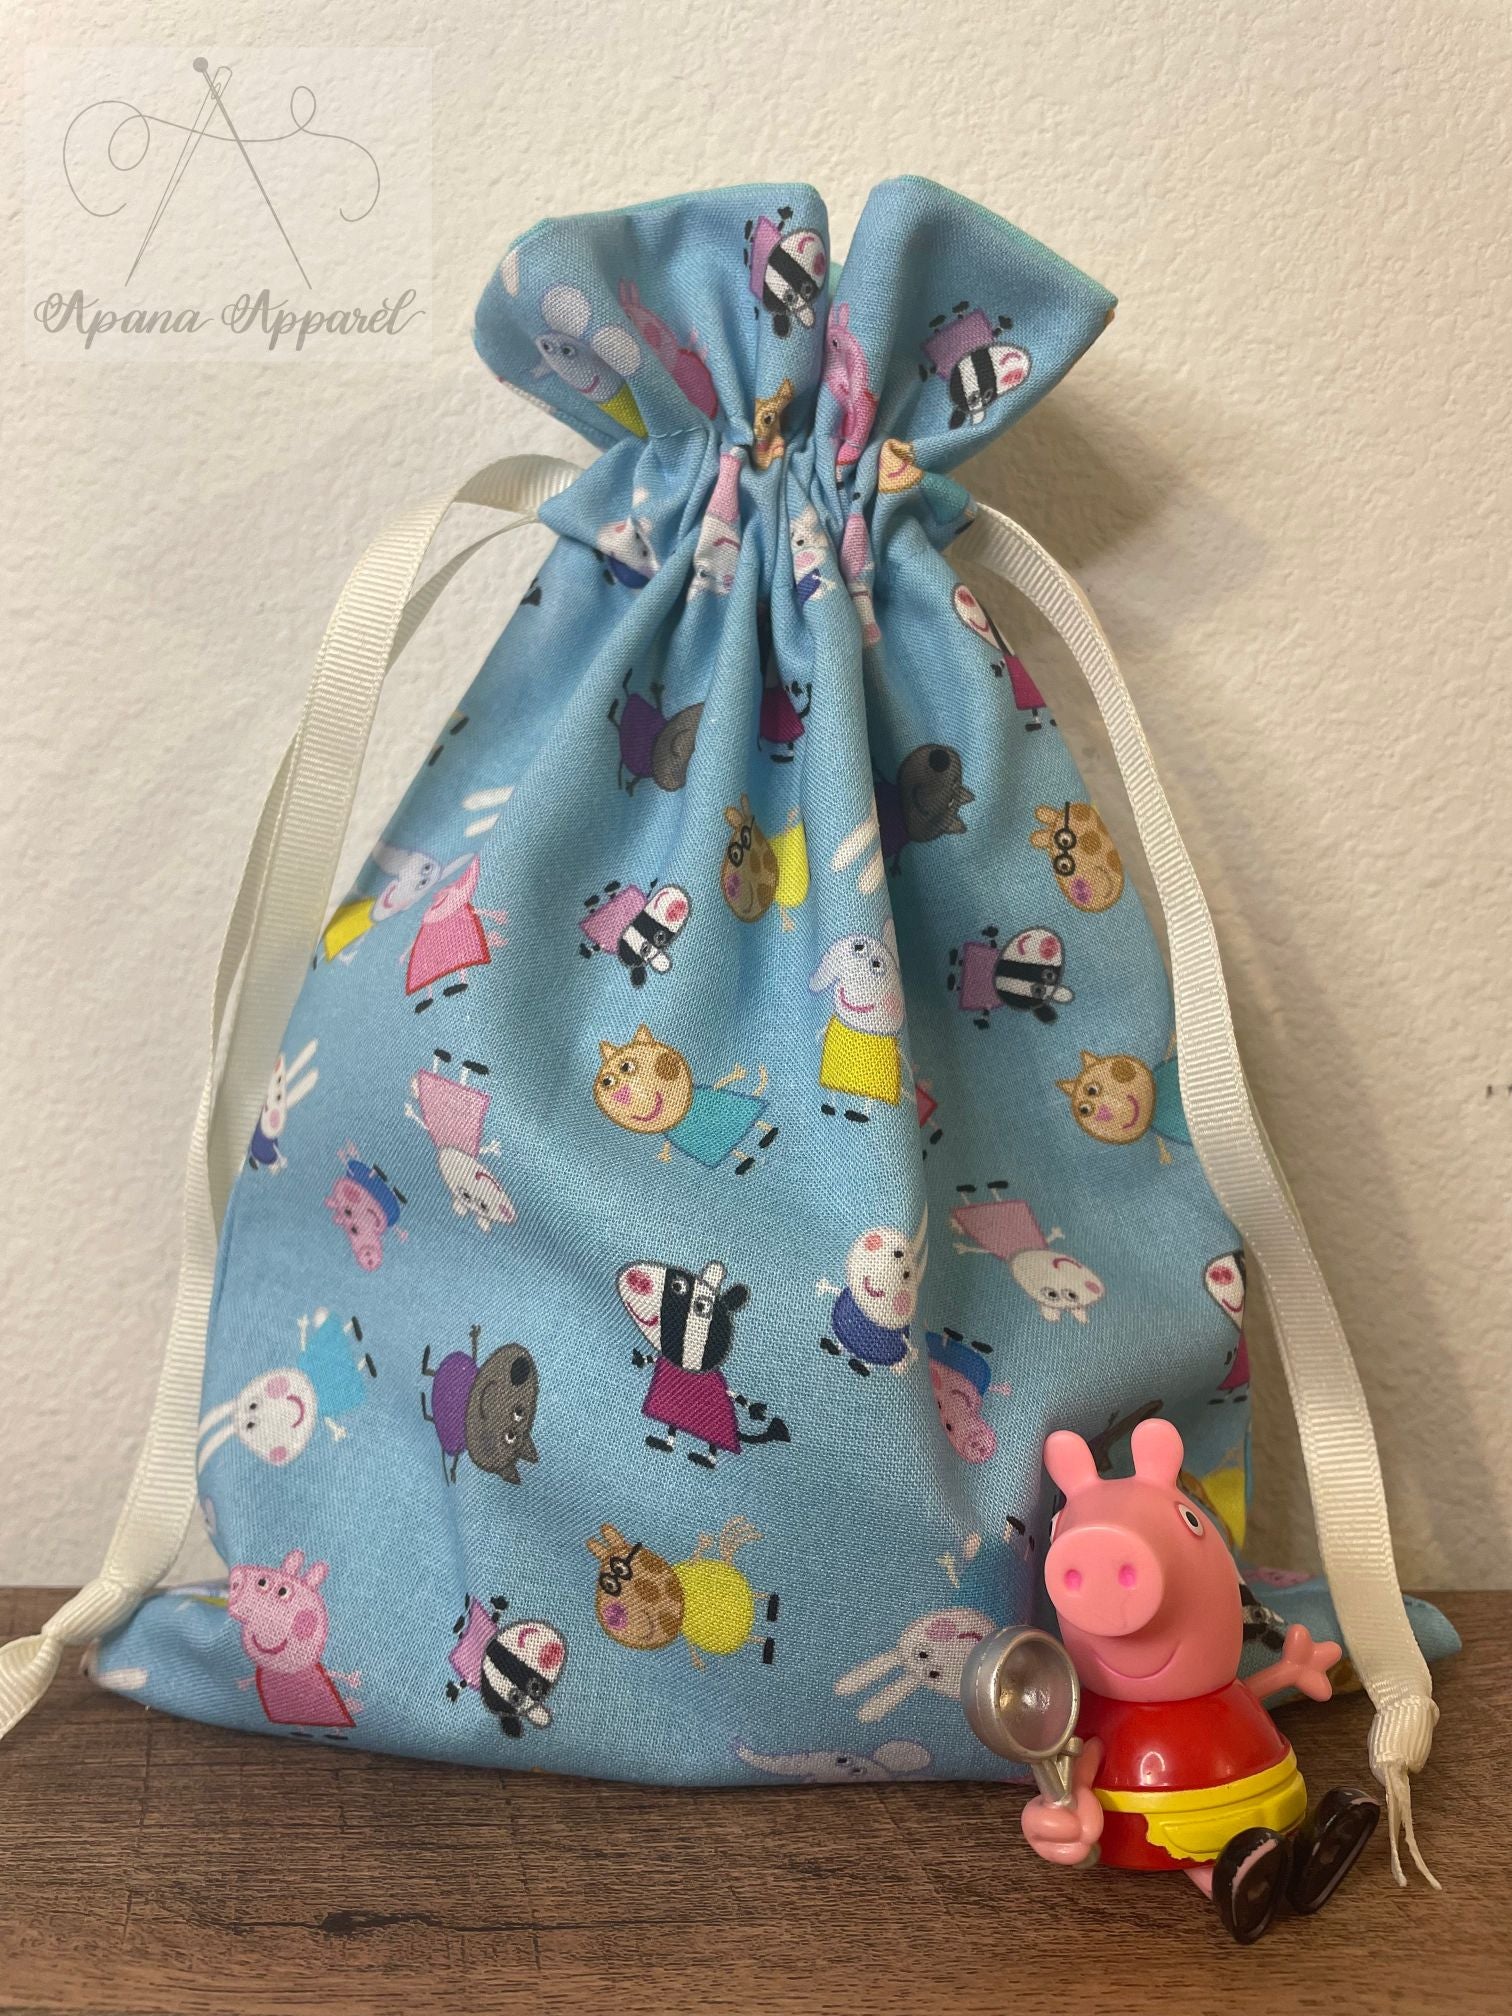 Sew a Drawstring Bag in 10 minutes